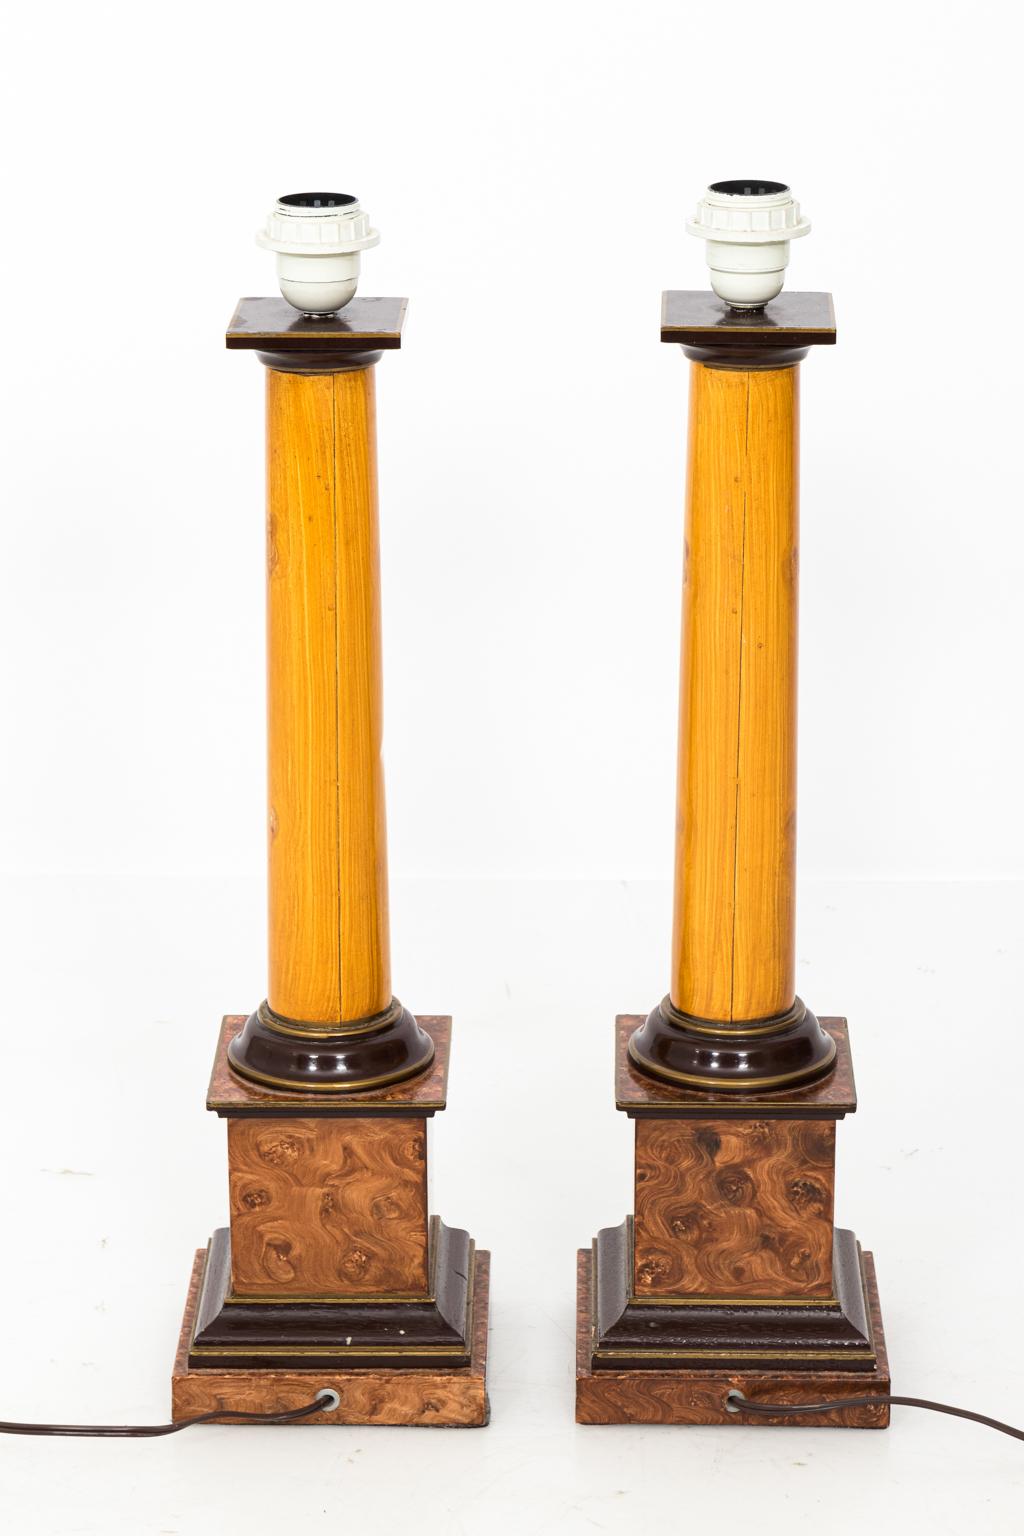 Pair of tole table lamps in a painted faux wood finish, circa 1990s.